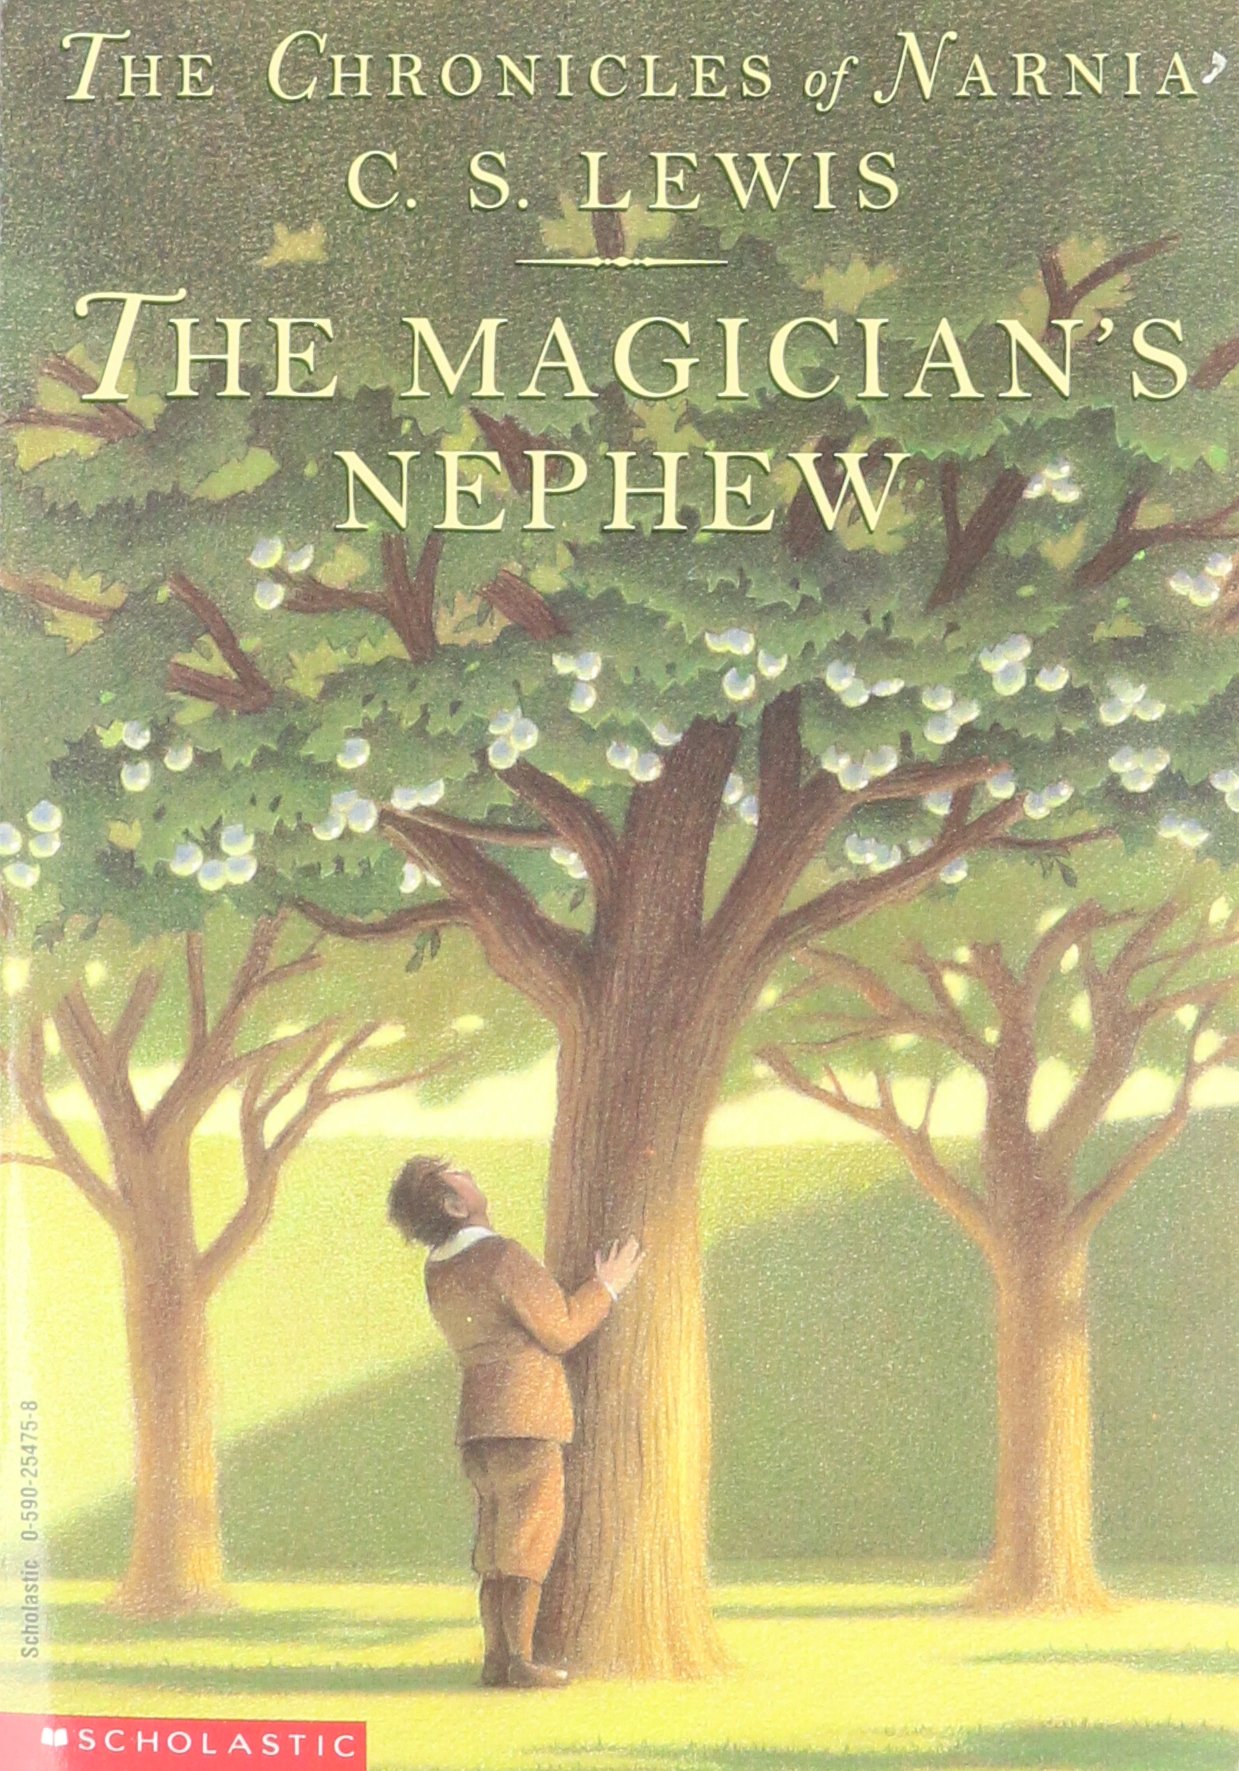 The Chronicles Of Narnia audiobook 6: The Magician's Nephew